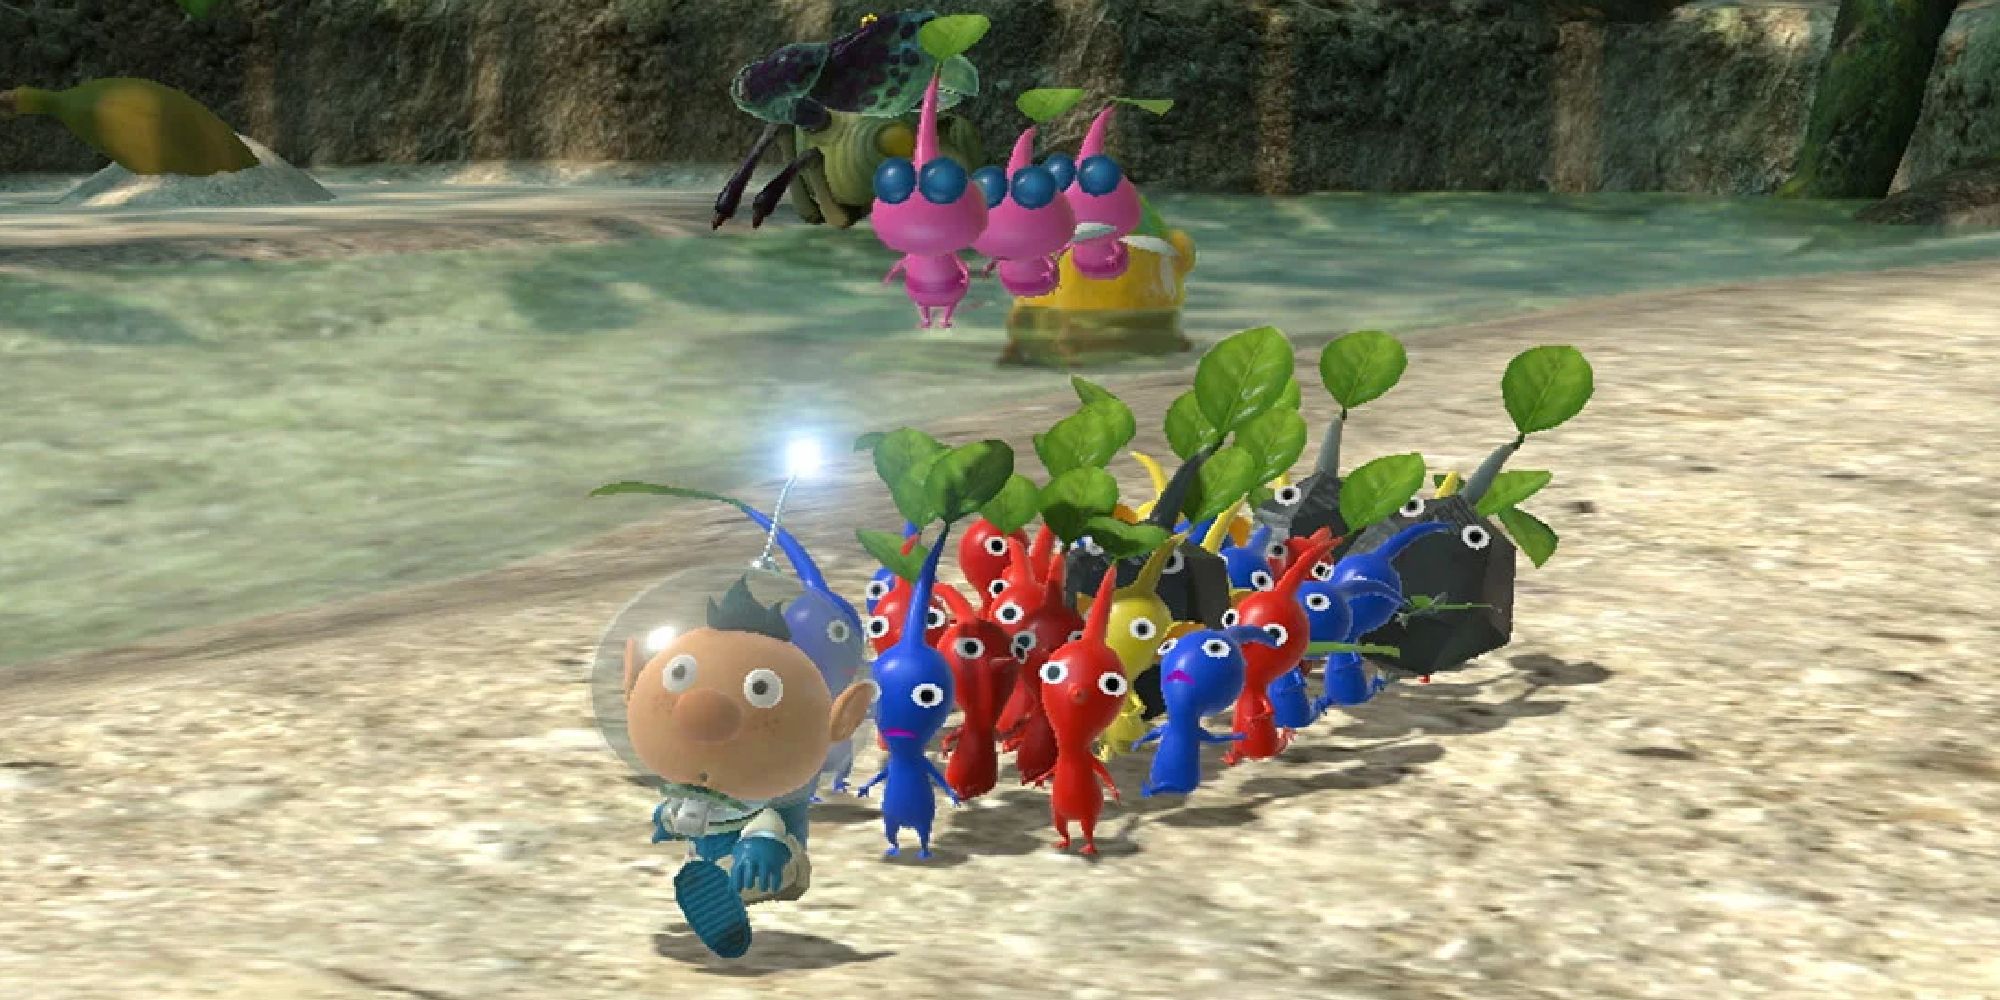 Alf walks along a lake with his Pikmin army in Pikmin 3